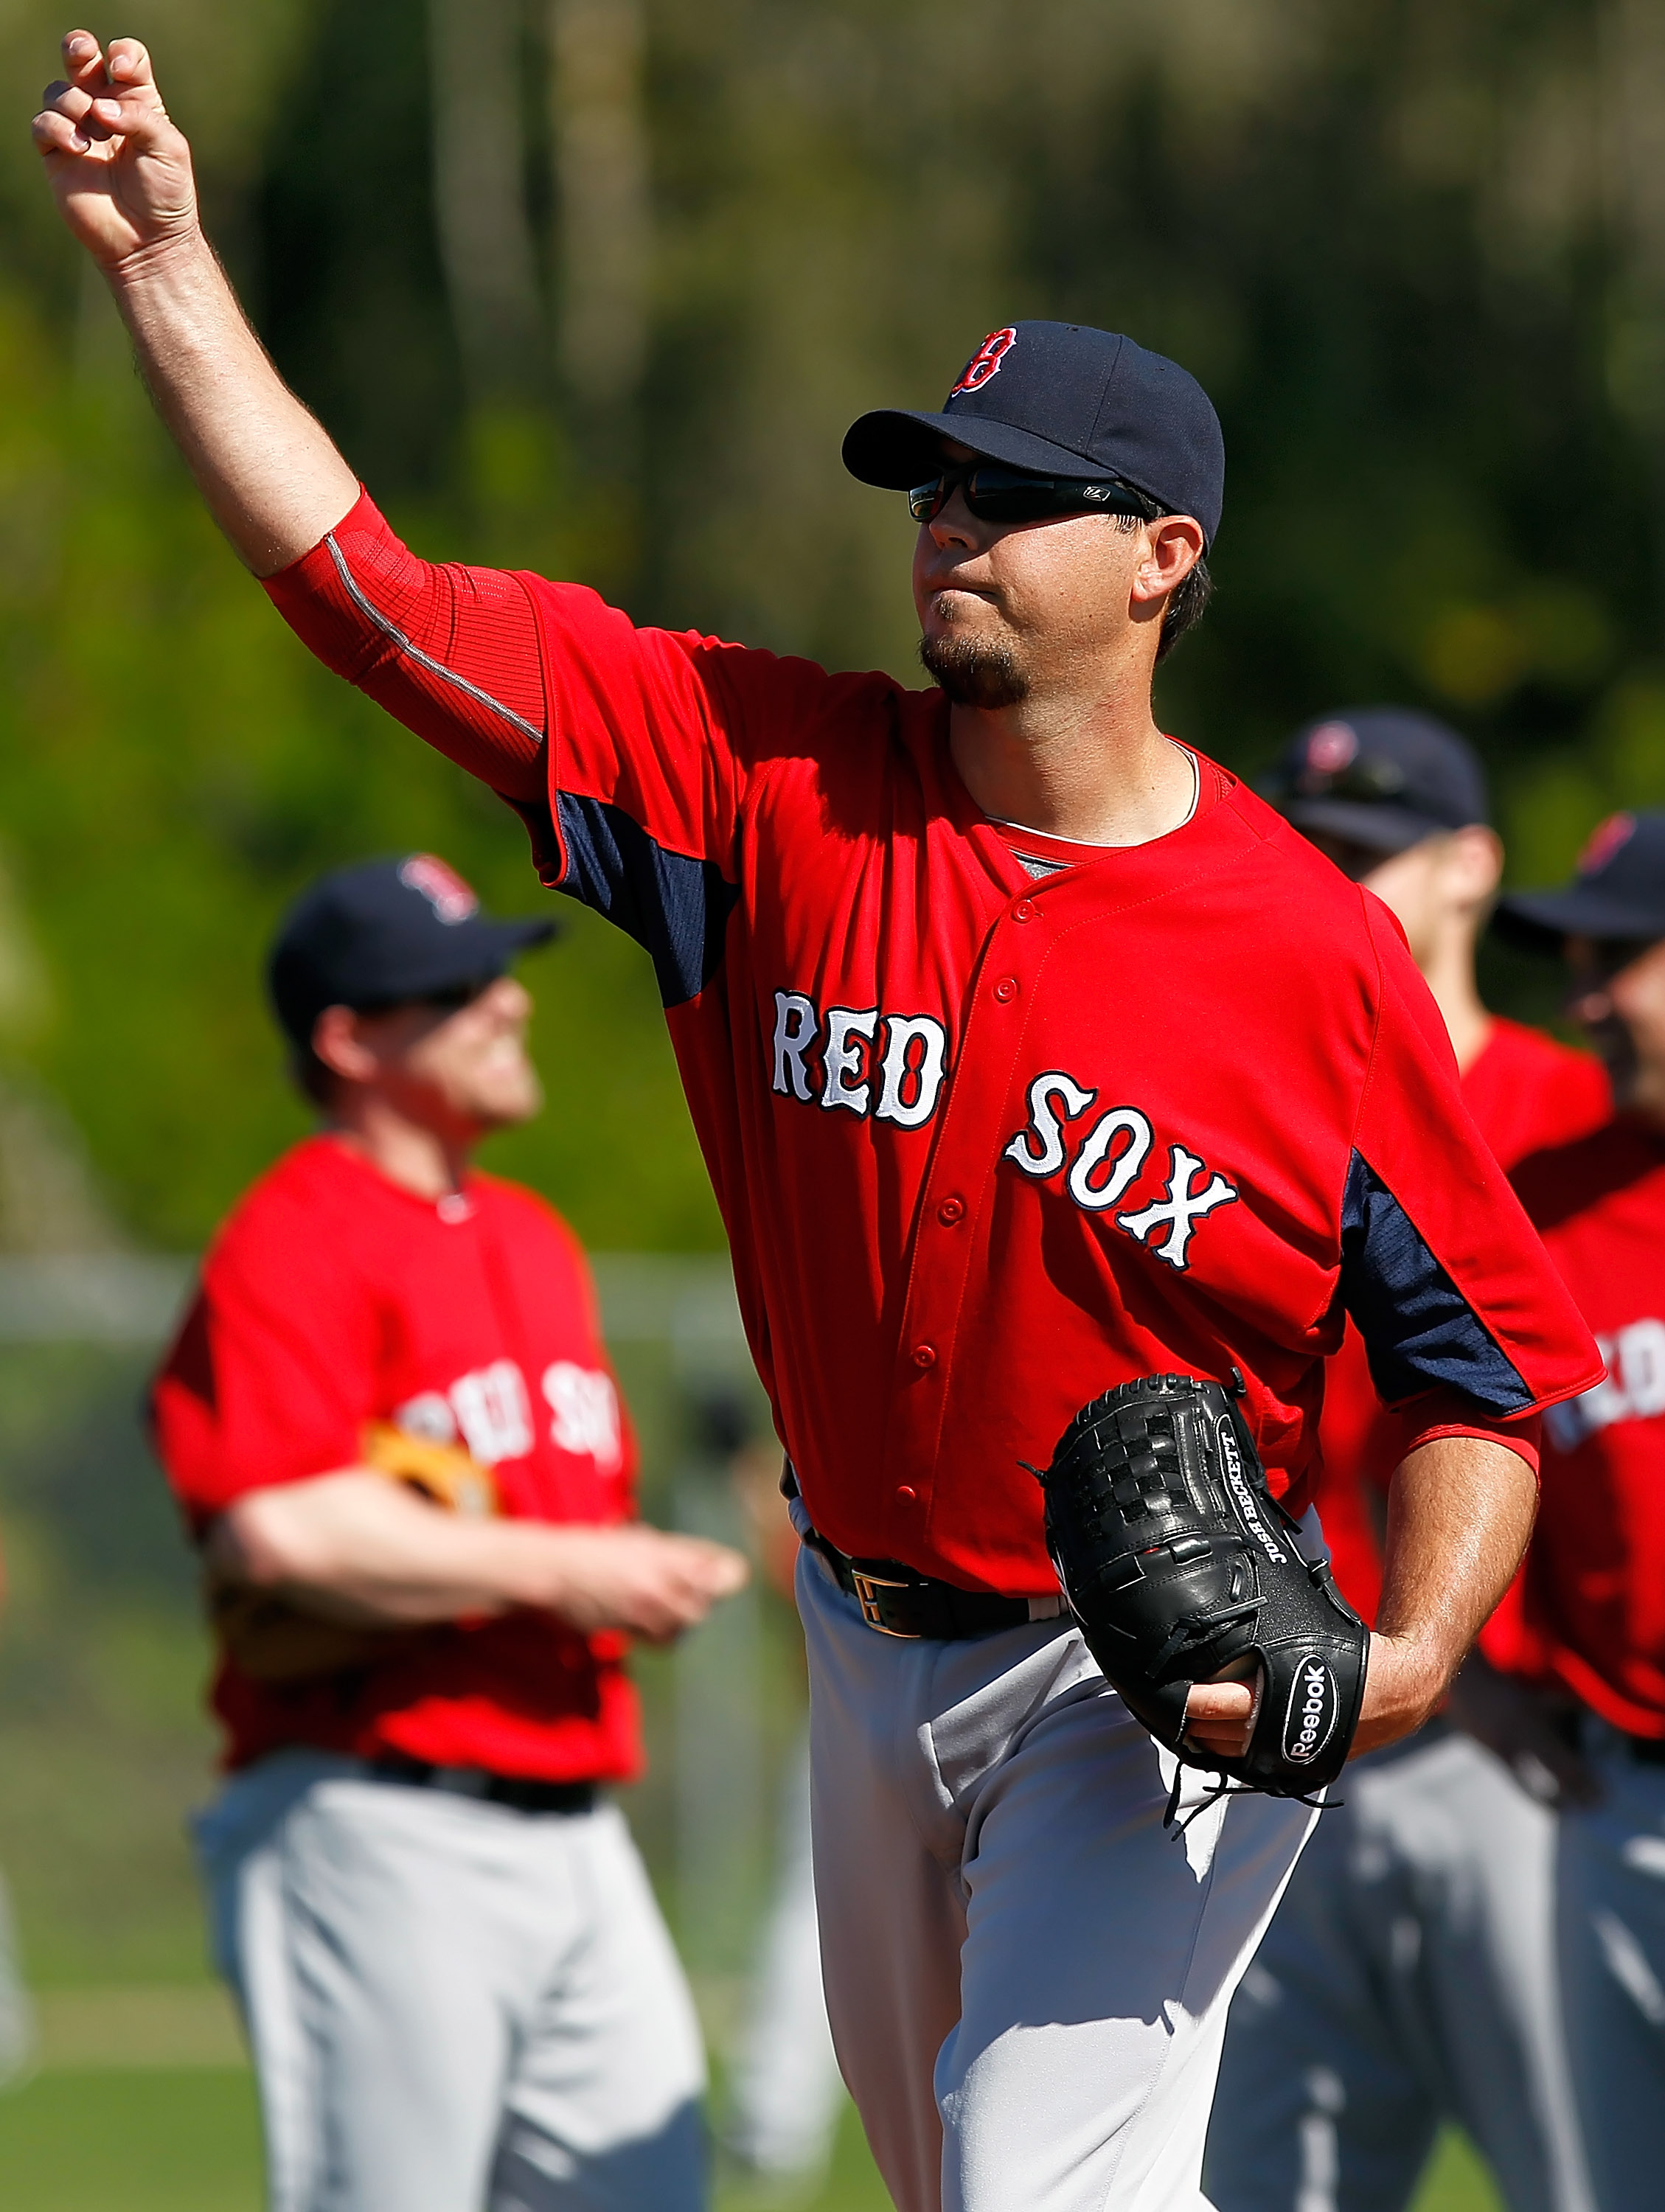 Josh Beckett recalls pitching 2008 ALCS Game 6 as Red Sox needed win to  stay alive